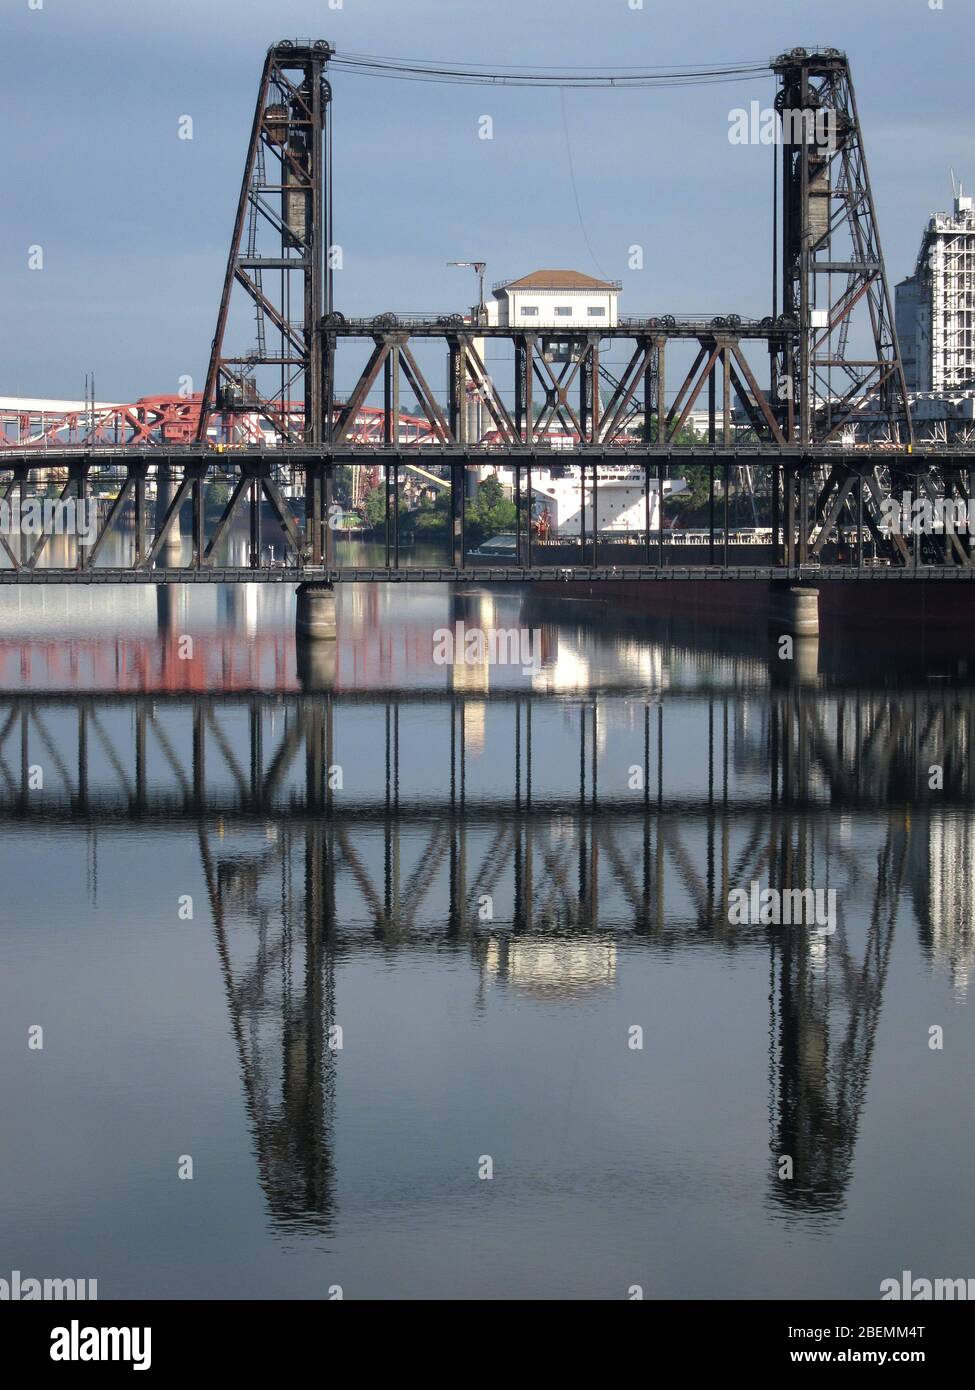 Reflections of the telescoping rail and road Steel Bridge over the Willamette River in Portland Oregon Stock Photo